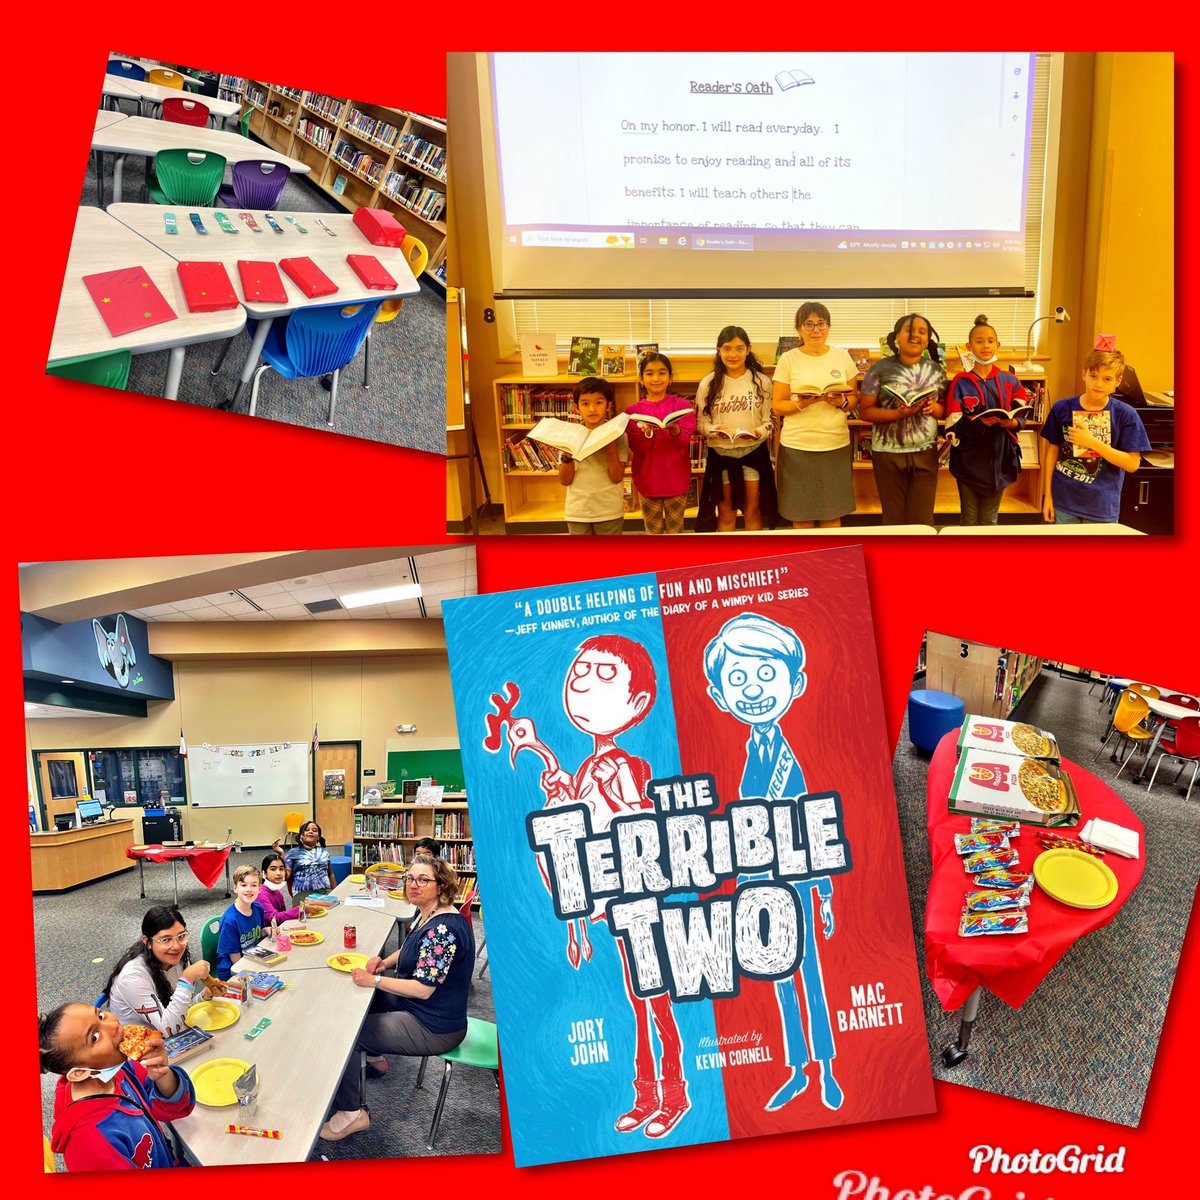 Our Carnahan Bibliophiles had their last meeting for the school year. Pizza, book gifts, and the creation of our own Reader’s Oath took place. #schoollibrarybookclub #readers #nisdlibraries